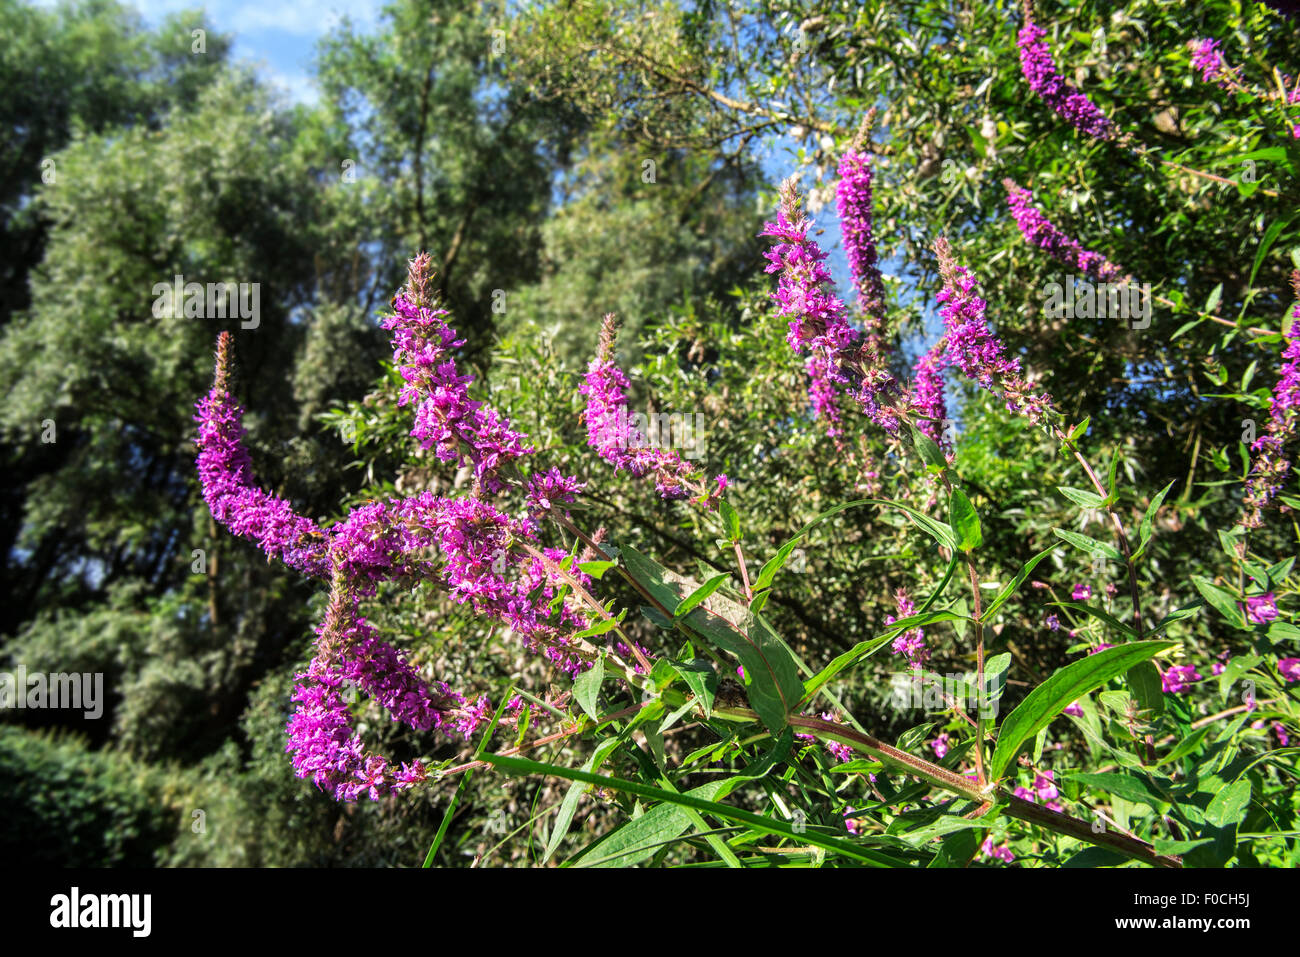 Worm's-eye view on purple loosestrife / spiked loosestrife / purple lythrum (Lythrum salicaria) in flower Stock Photo